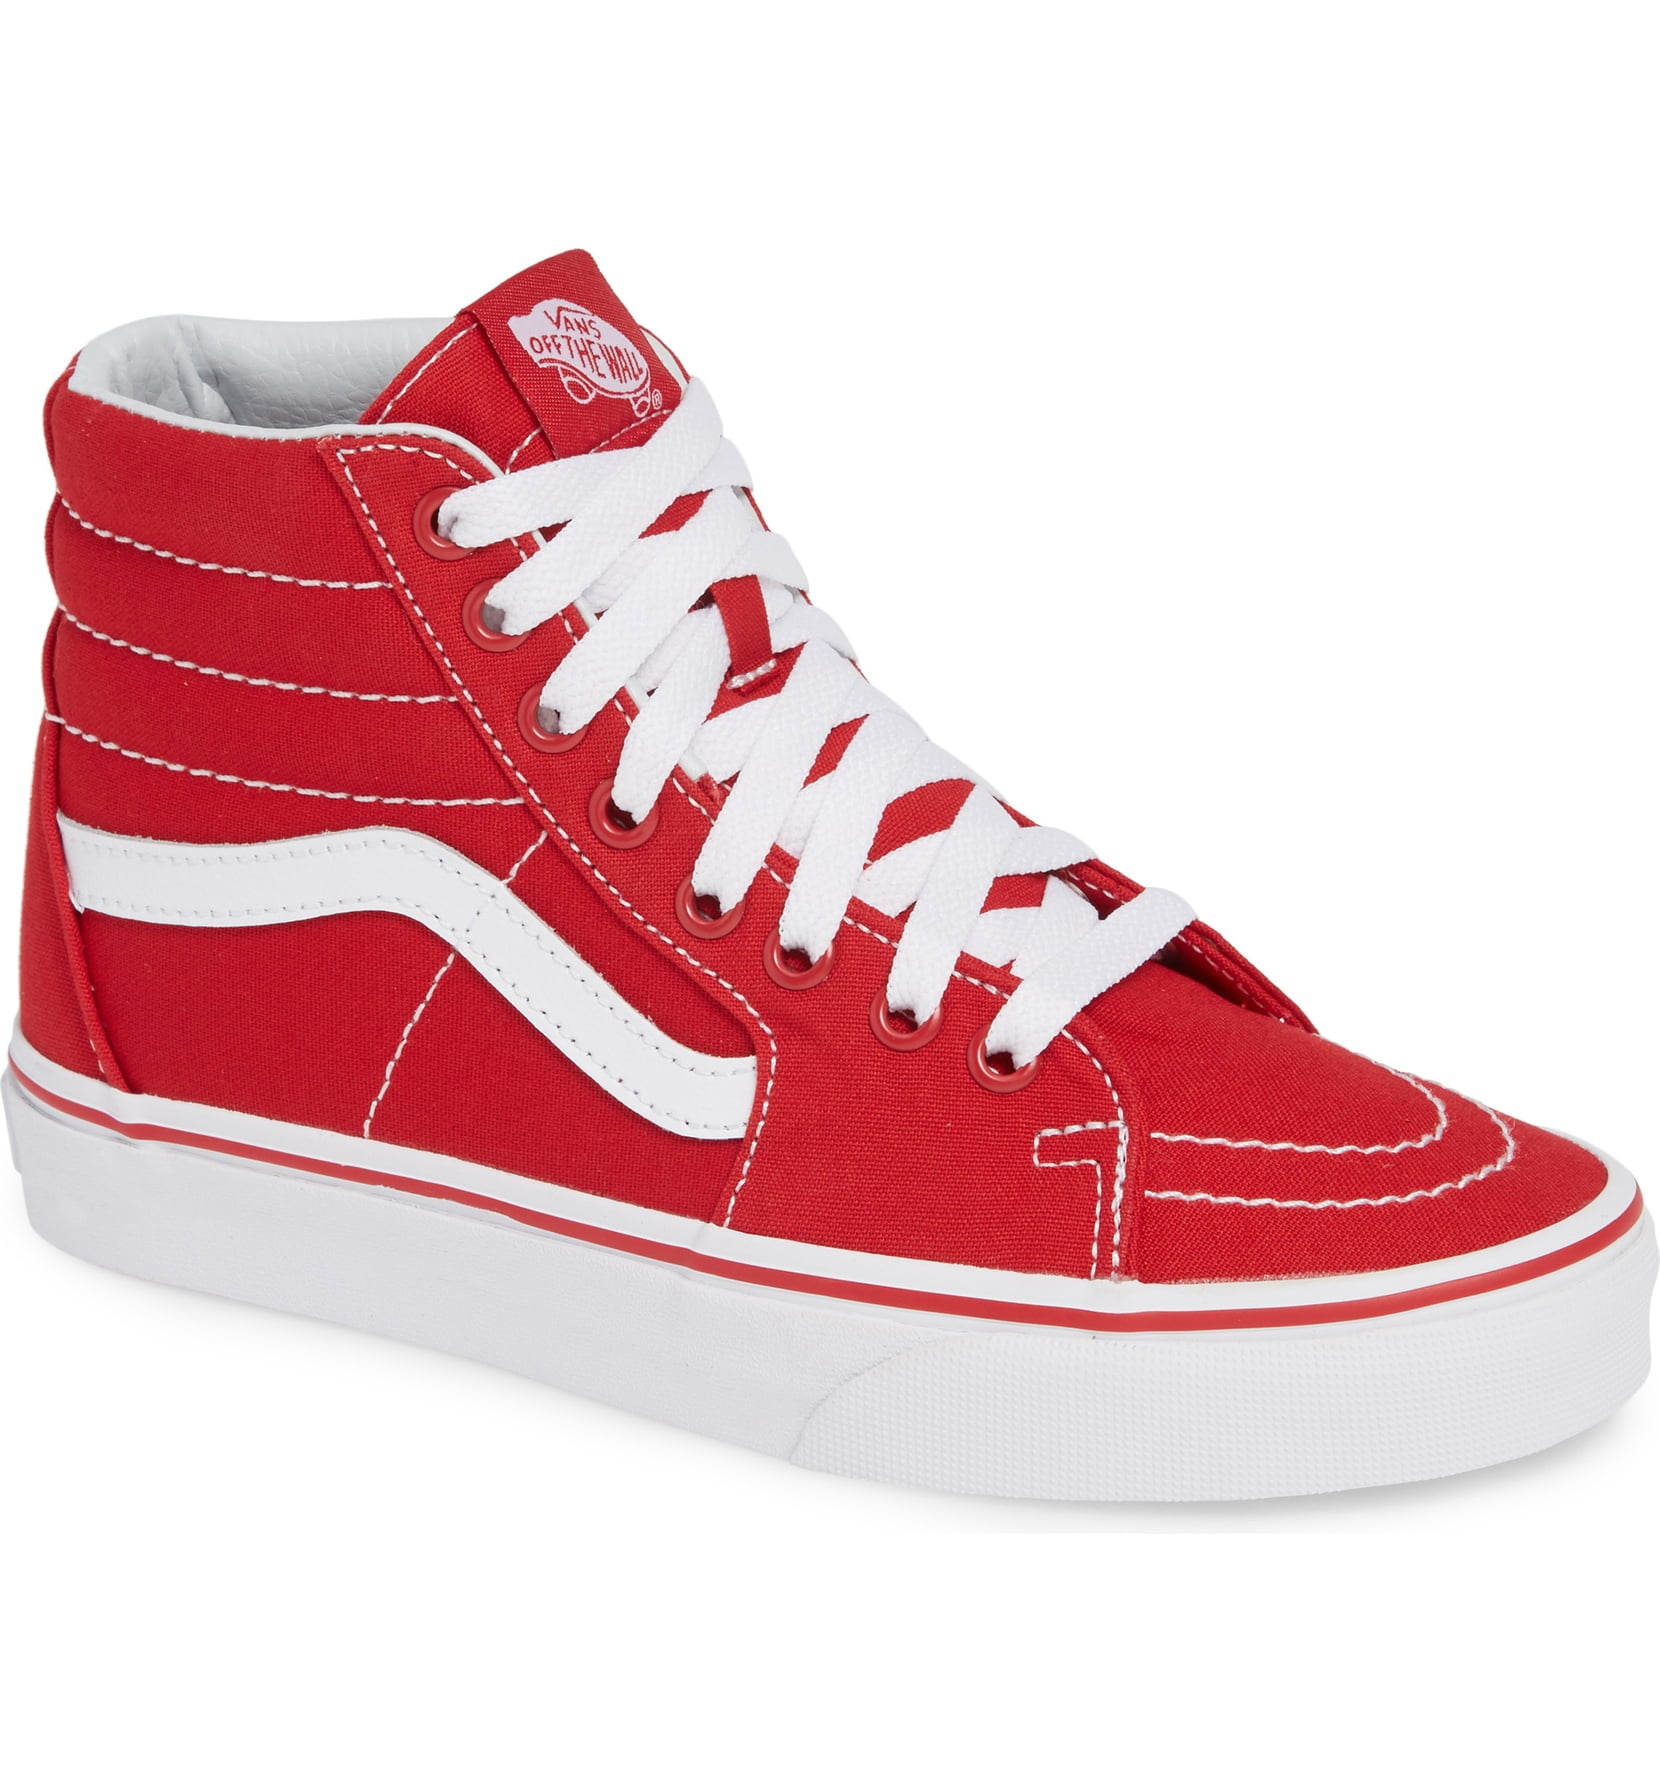 what to wear with red high top vans